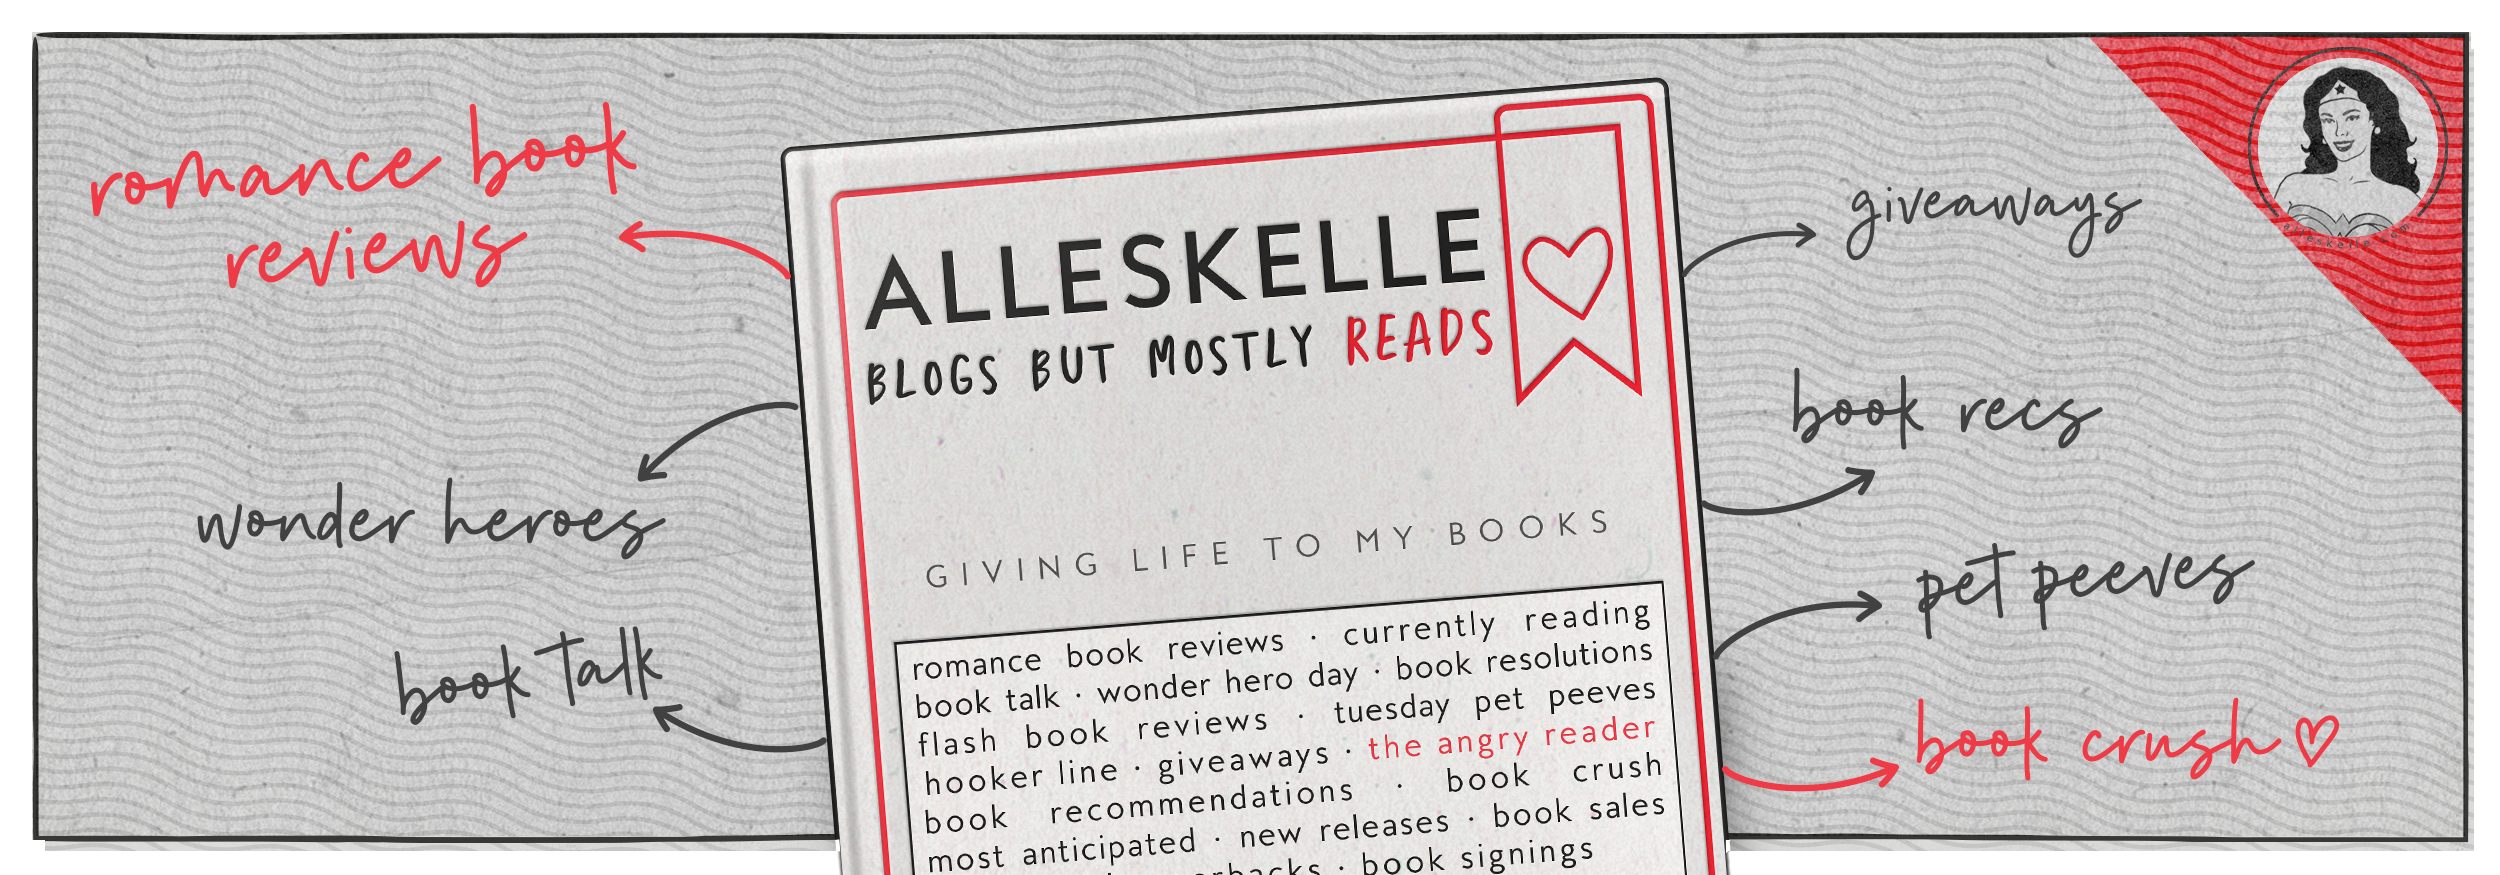 Alleskelle - Giving Life to my Books - Romance Book Reviews ⎜Giving life to my books